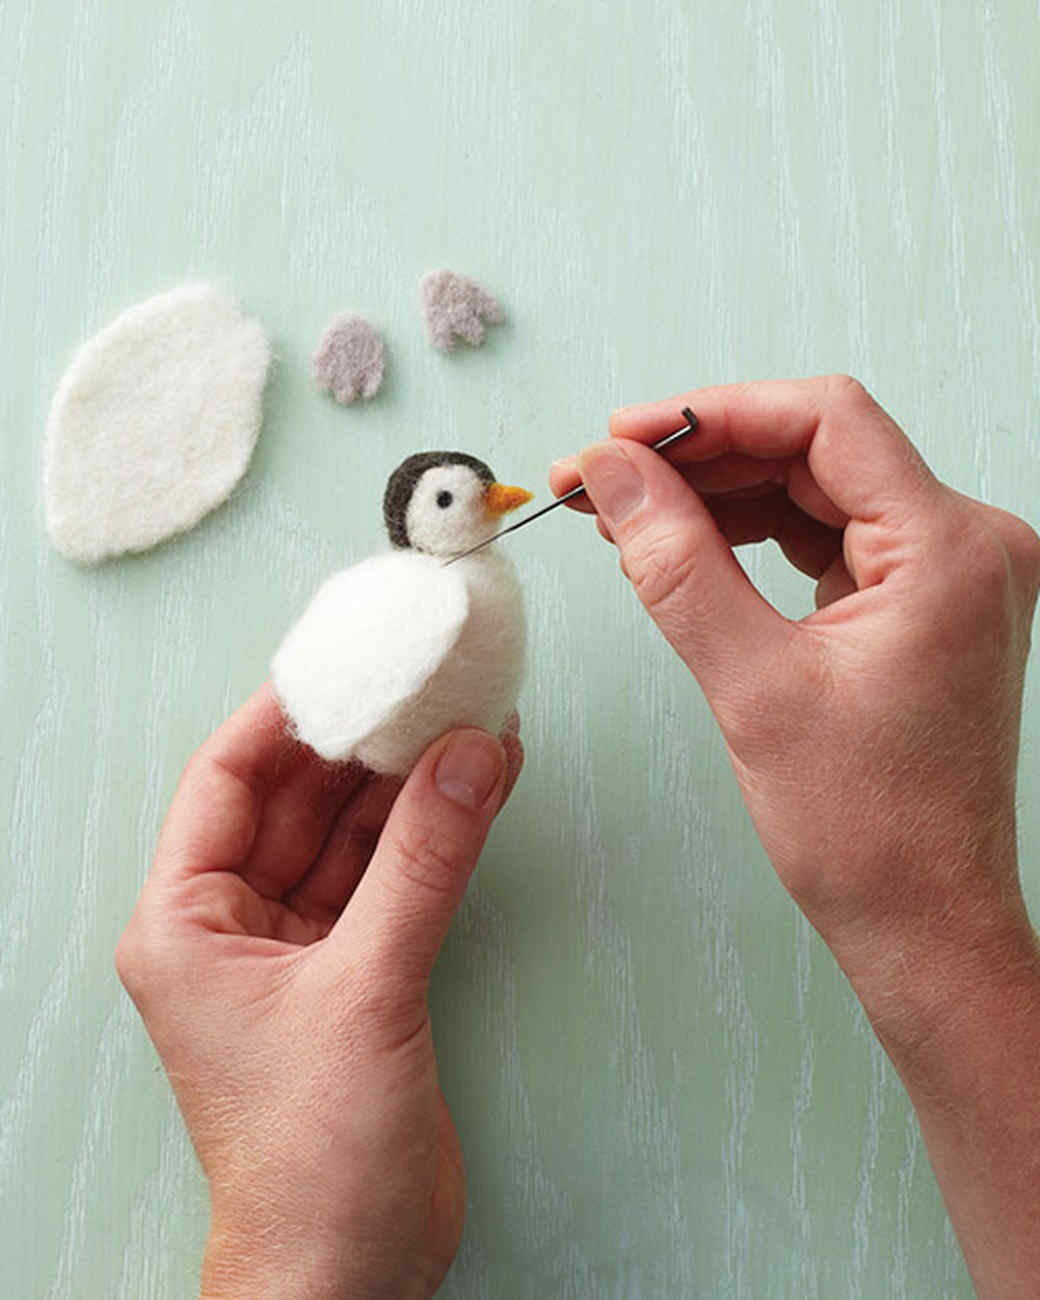 Let's Get Together and Needle Felt